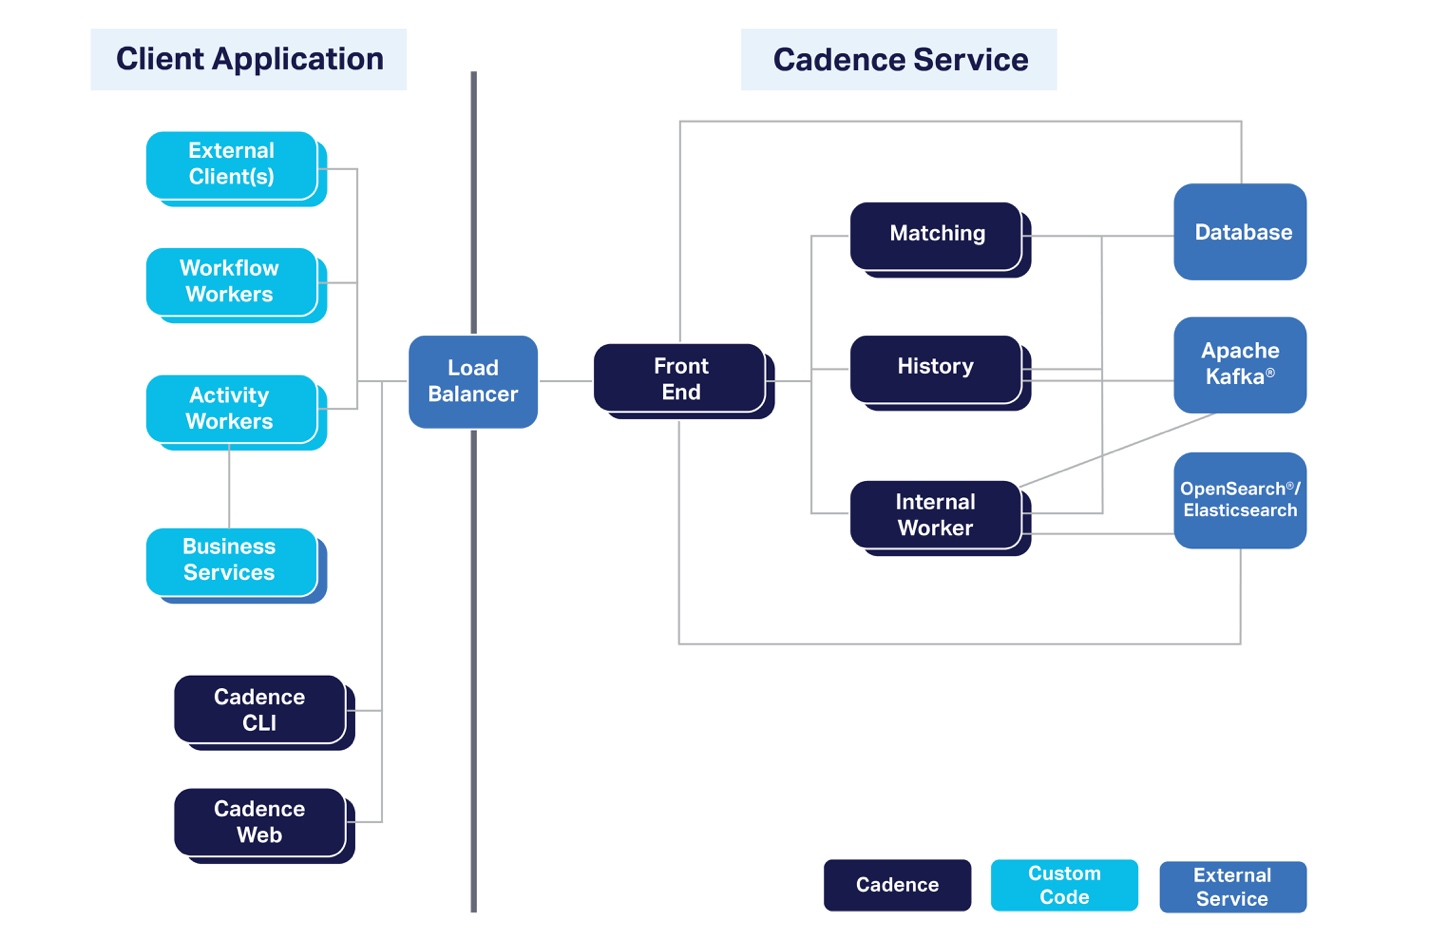 Image of client application and Cadence service